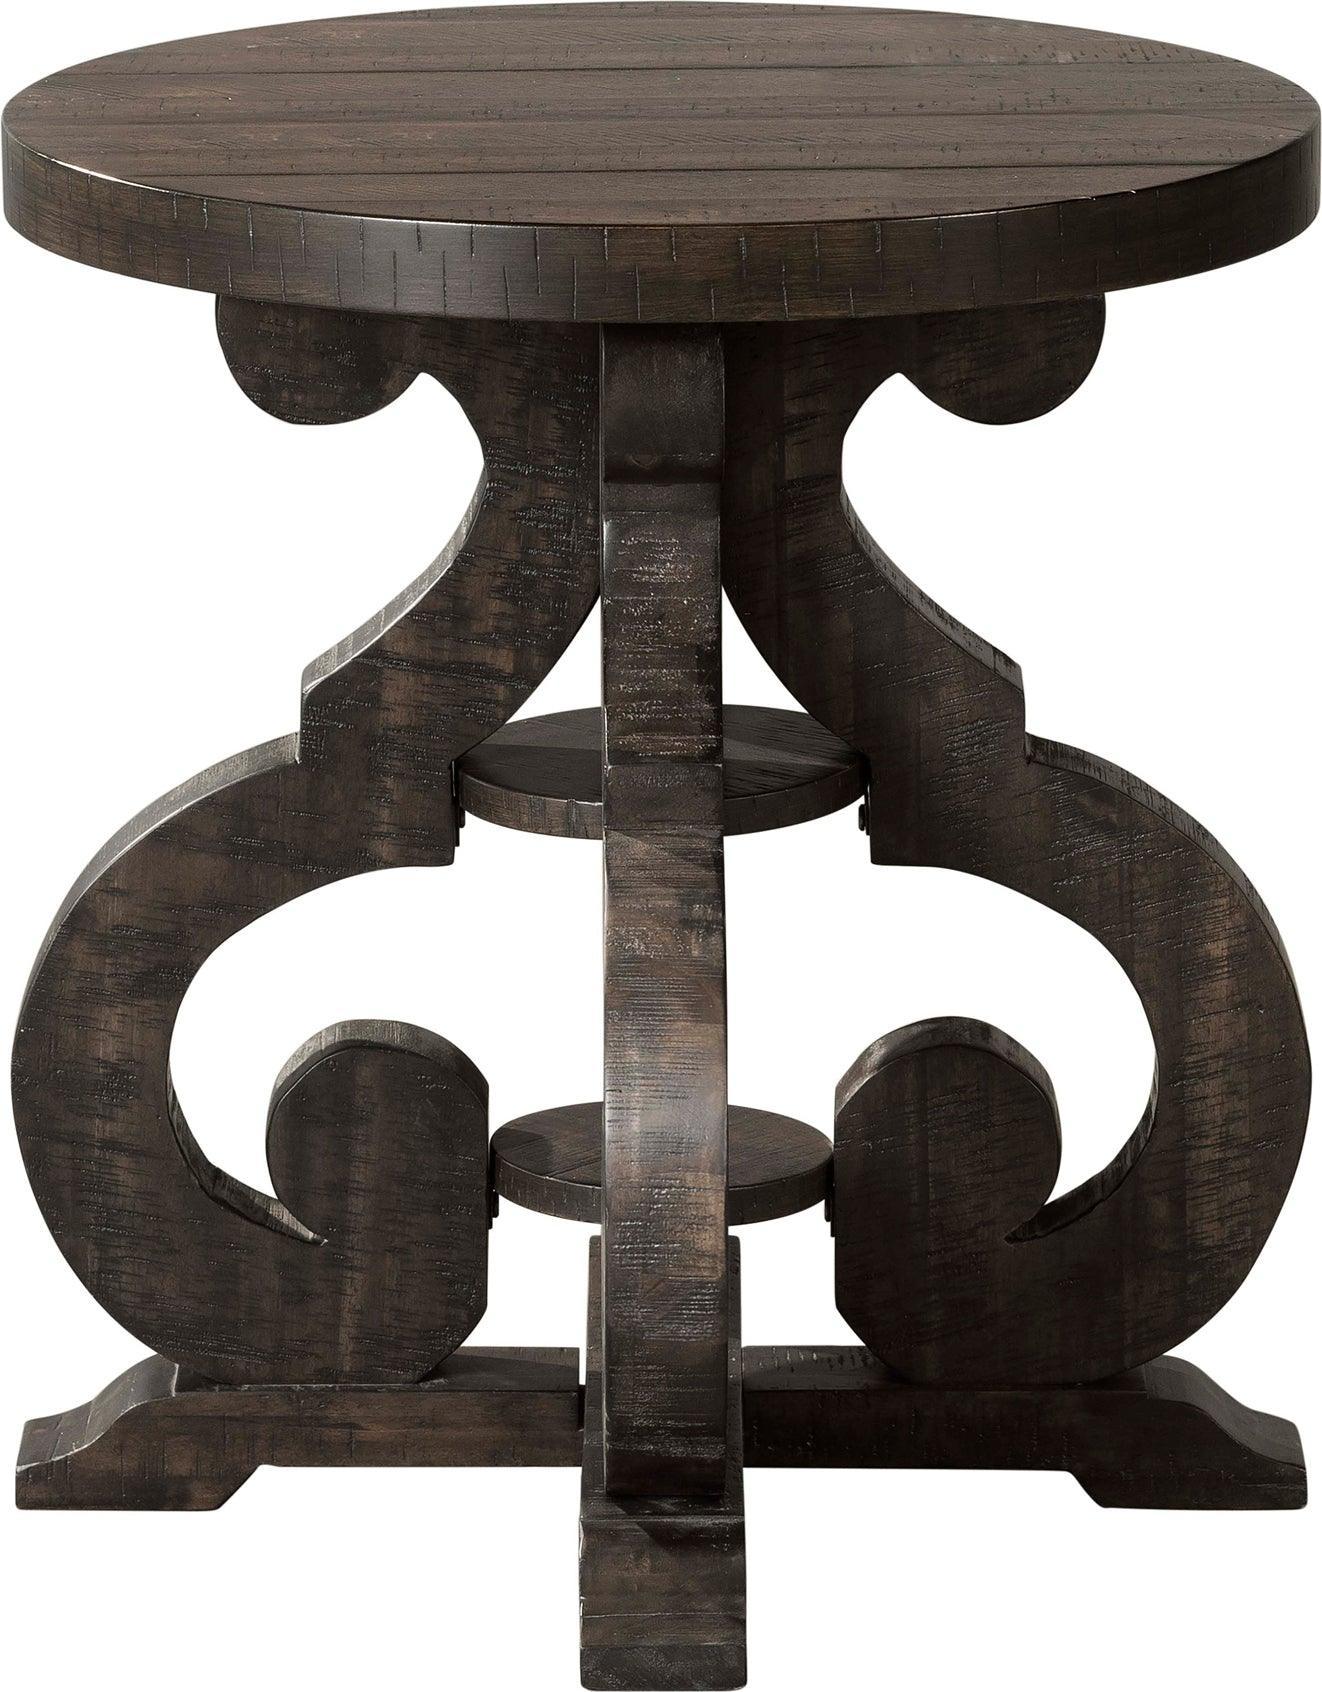 Elements Side & End Tables - Stanford Round End Table Smokey Walnut